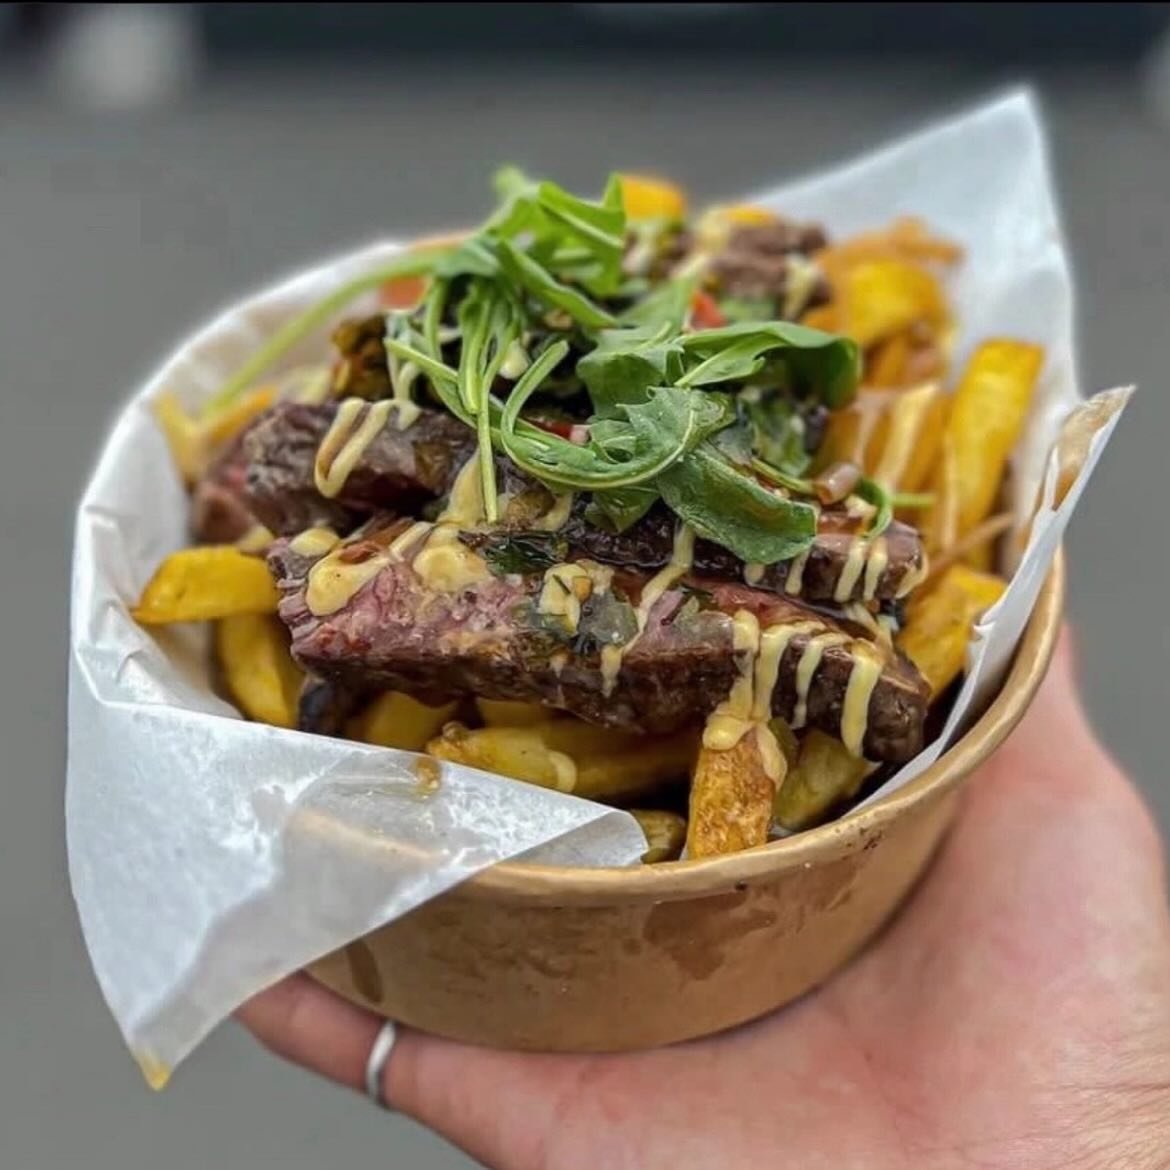 Hold up. We&rsquo;ve got @de_boeuf coming in with the - well, you guessed it - beef 🥩🔥

Matured steak, fries, sauces. What else do you need?

Last Friday is on Friday 26th April. Tickets in bio 🎟️